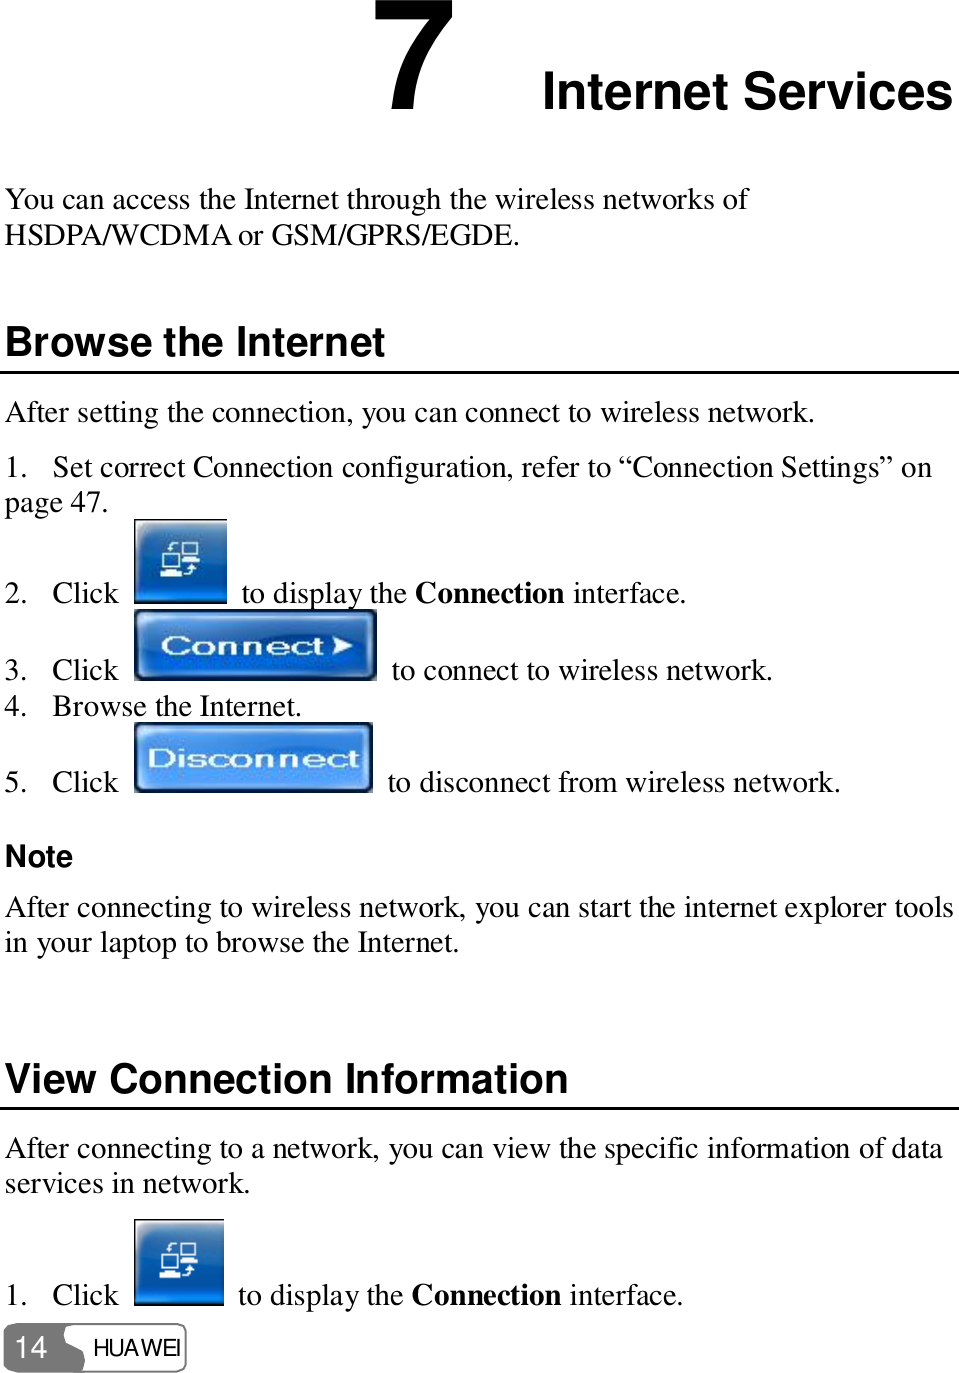  HUAWEI  14 7  Internet Services You can access the Internet through the wireless networks of HSDPA/WCDMA or GSM/GPRS/EGDE. Browse the Internet After setting the connection, you can connect to wireless network. 1. Set correct Connection configuration, refer to “Connection Settings” on page 47. 2. Click    to display the Connection interface. 3. Click   to connect to wireless network. 4. Browse the Internet. 5. Click   to disconnect from wireless network. Note  After connecting to wireless network, you can start the internet explorer tools in your laptop to browse the Internet.  View Connection Information After connecting to a network, you can view the specific information of data services in network. 1. Click   to display the Connection interface. 